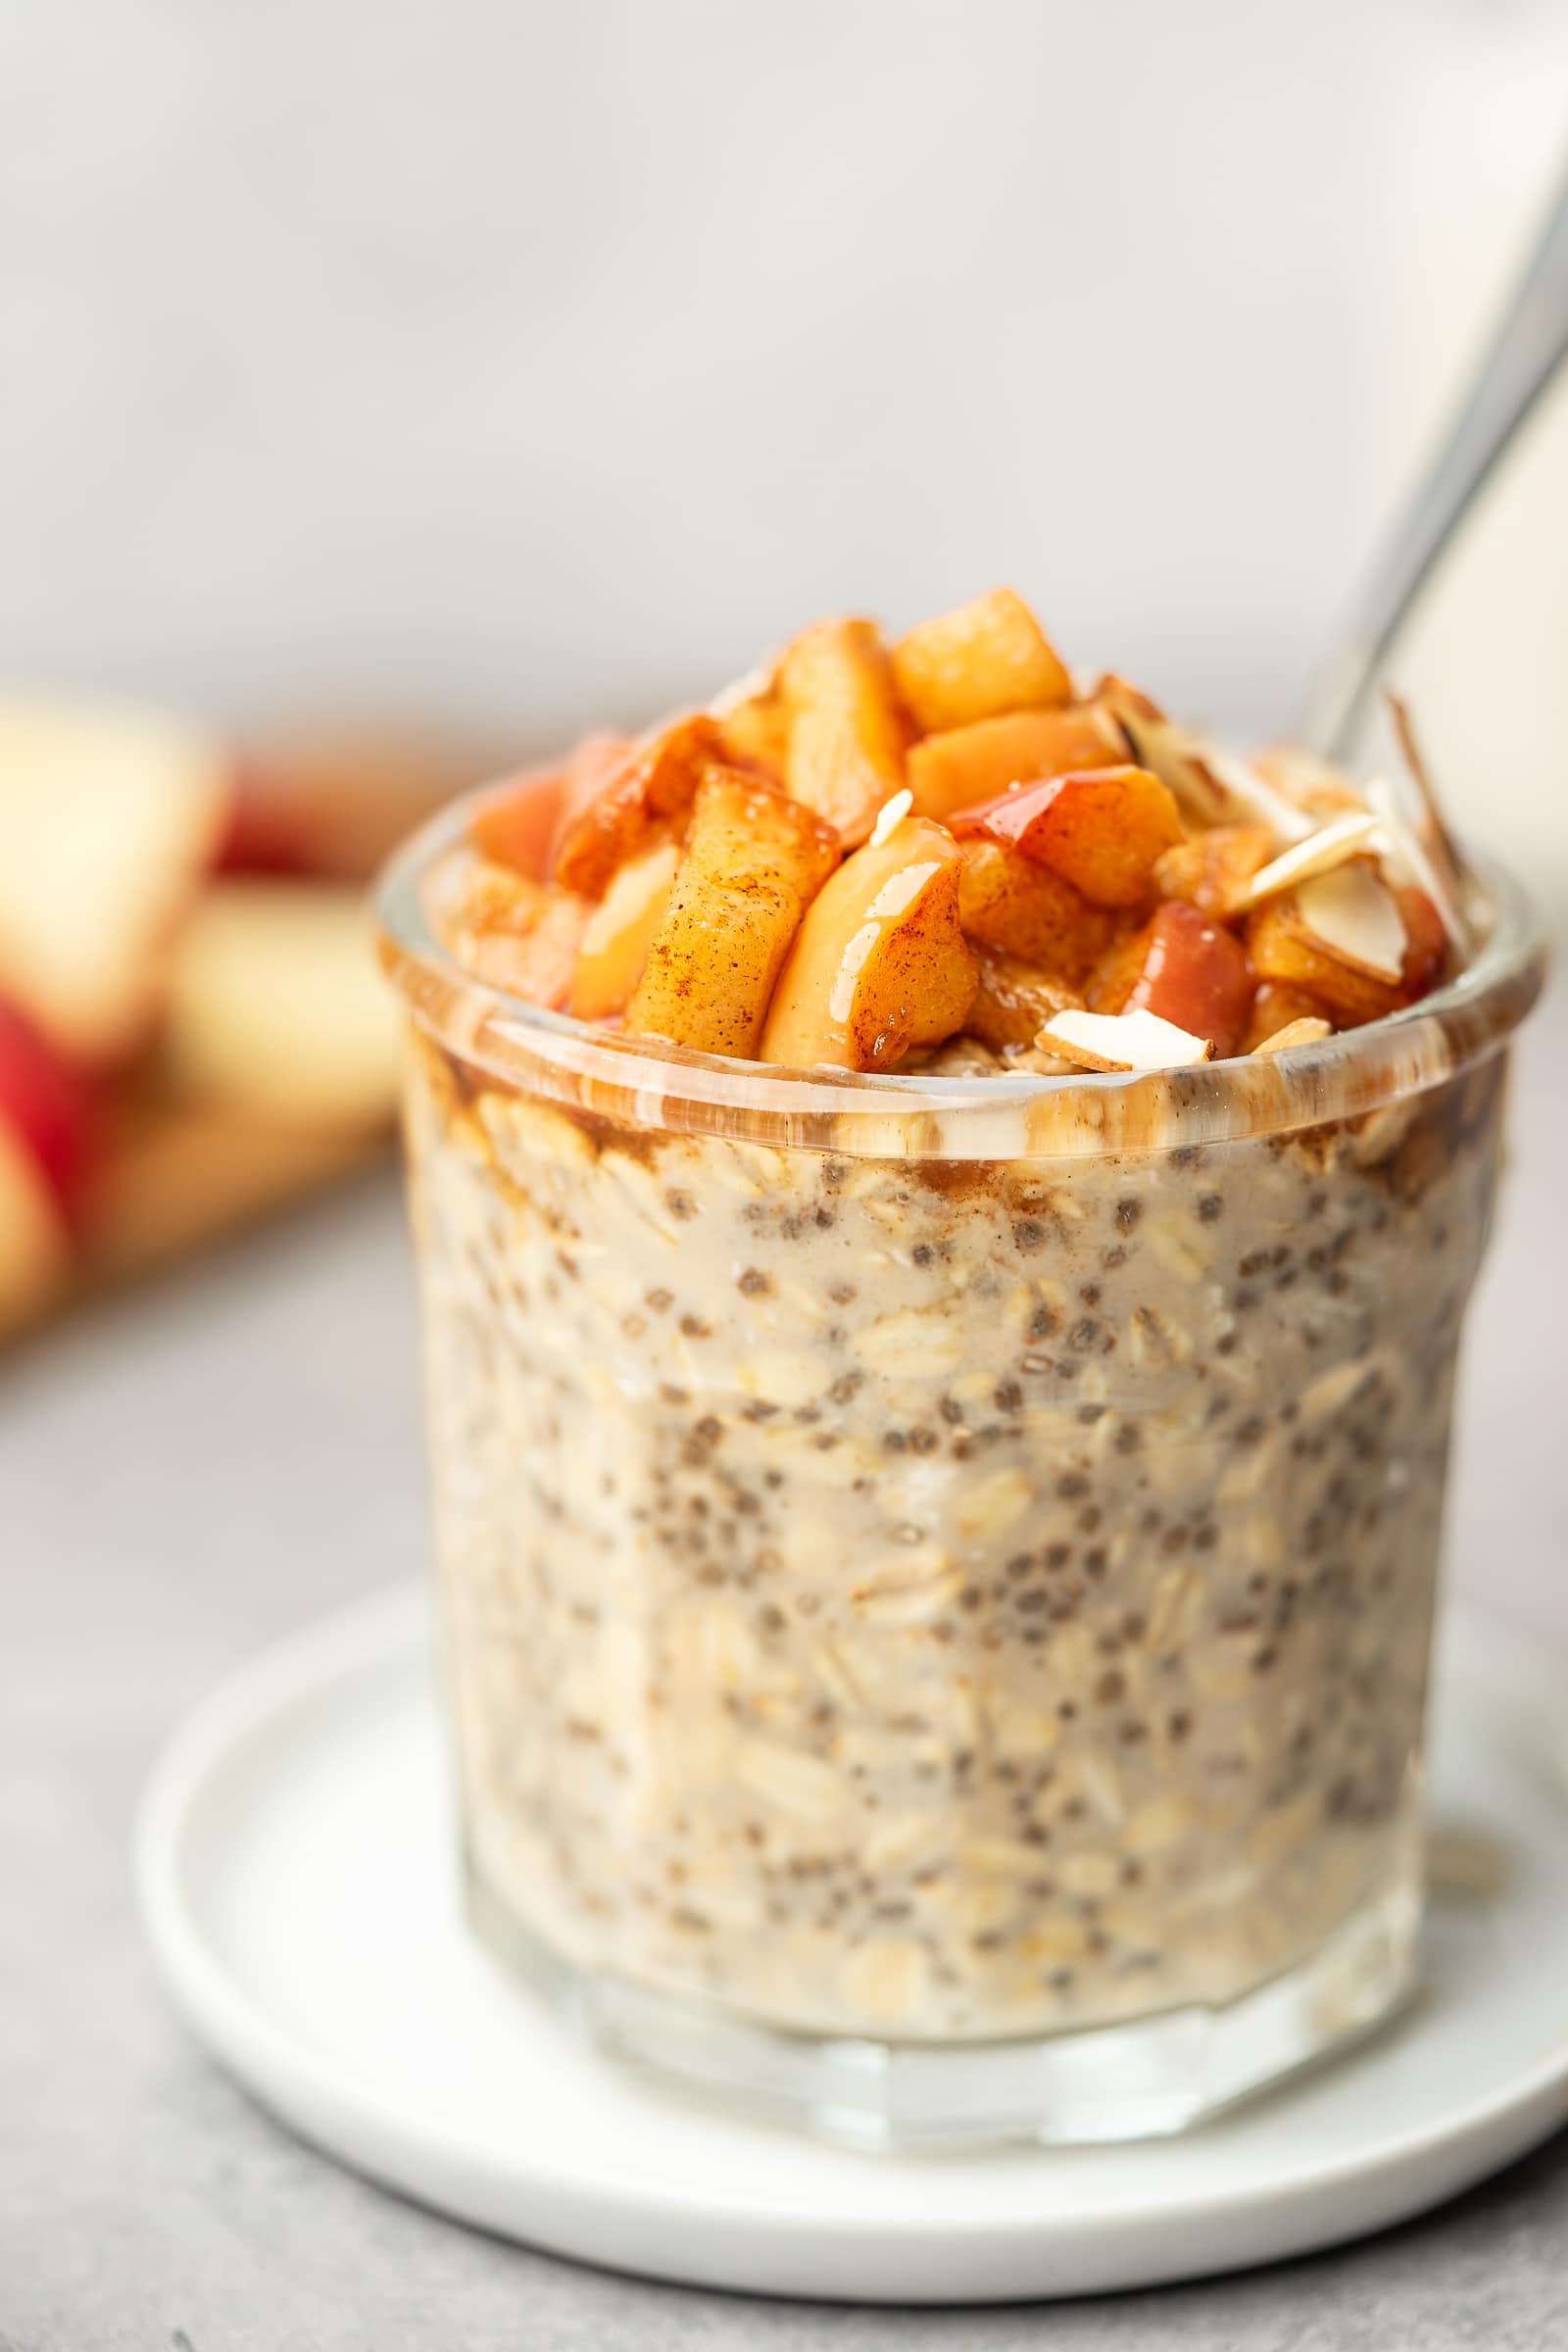 Overnight oats in a glass jar topped with cooked cinnamon apples.